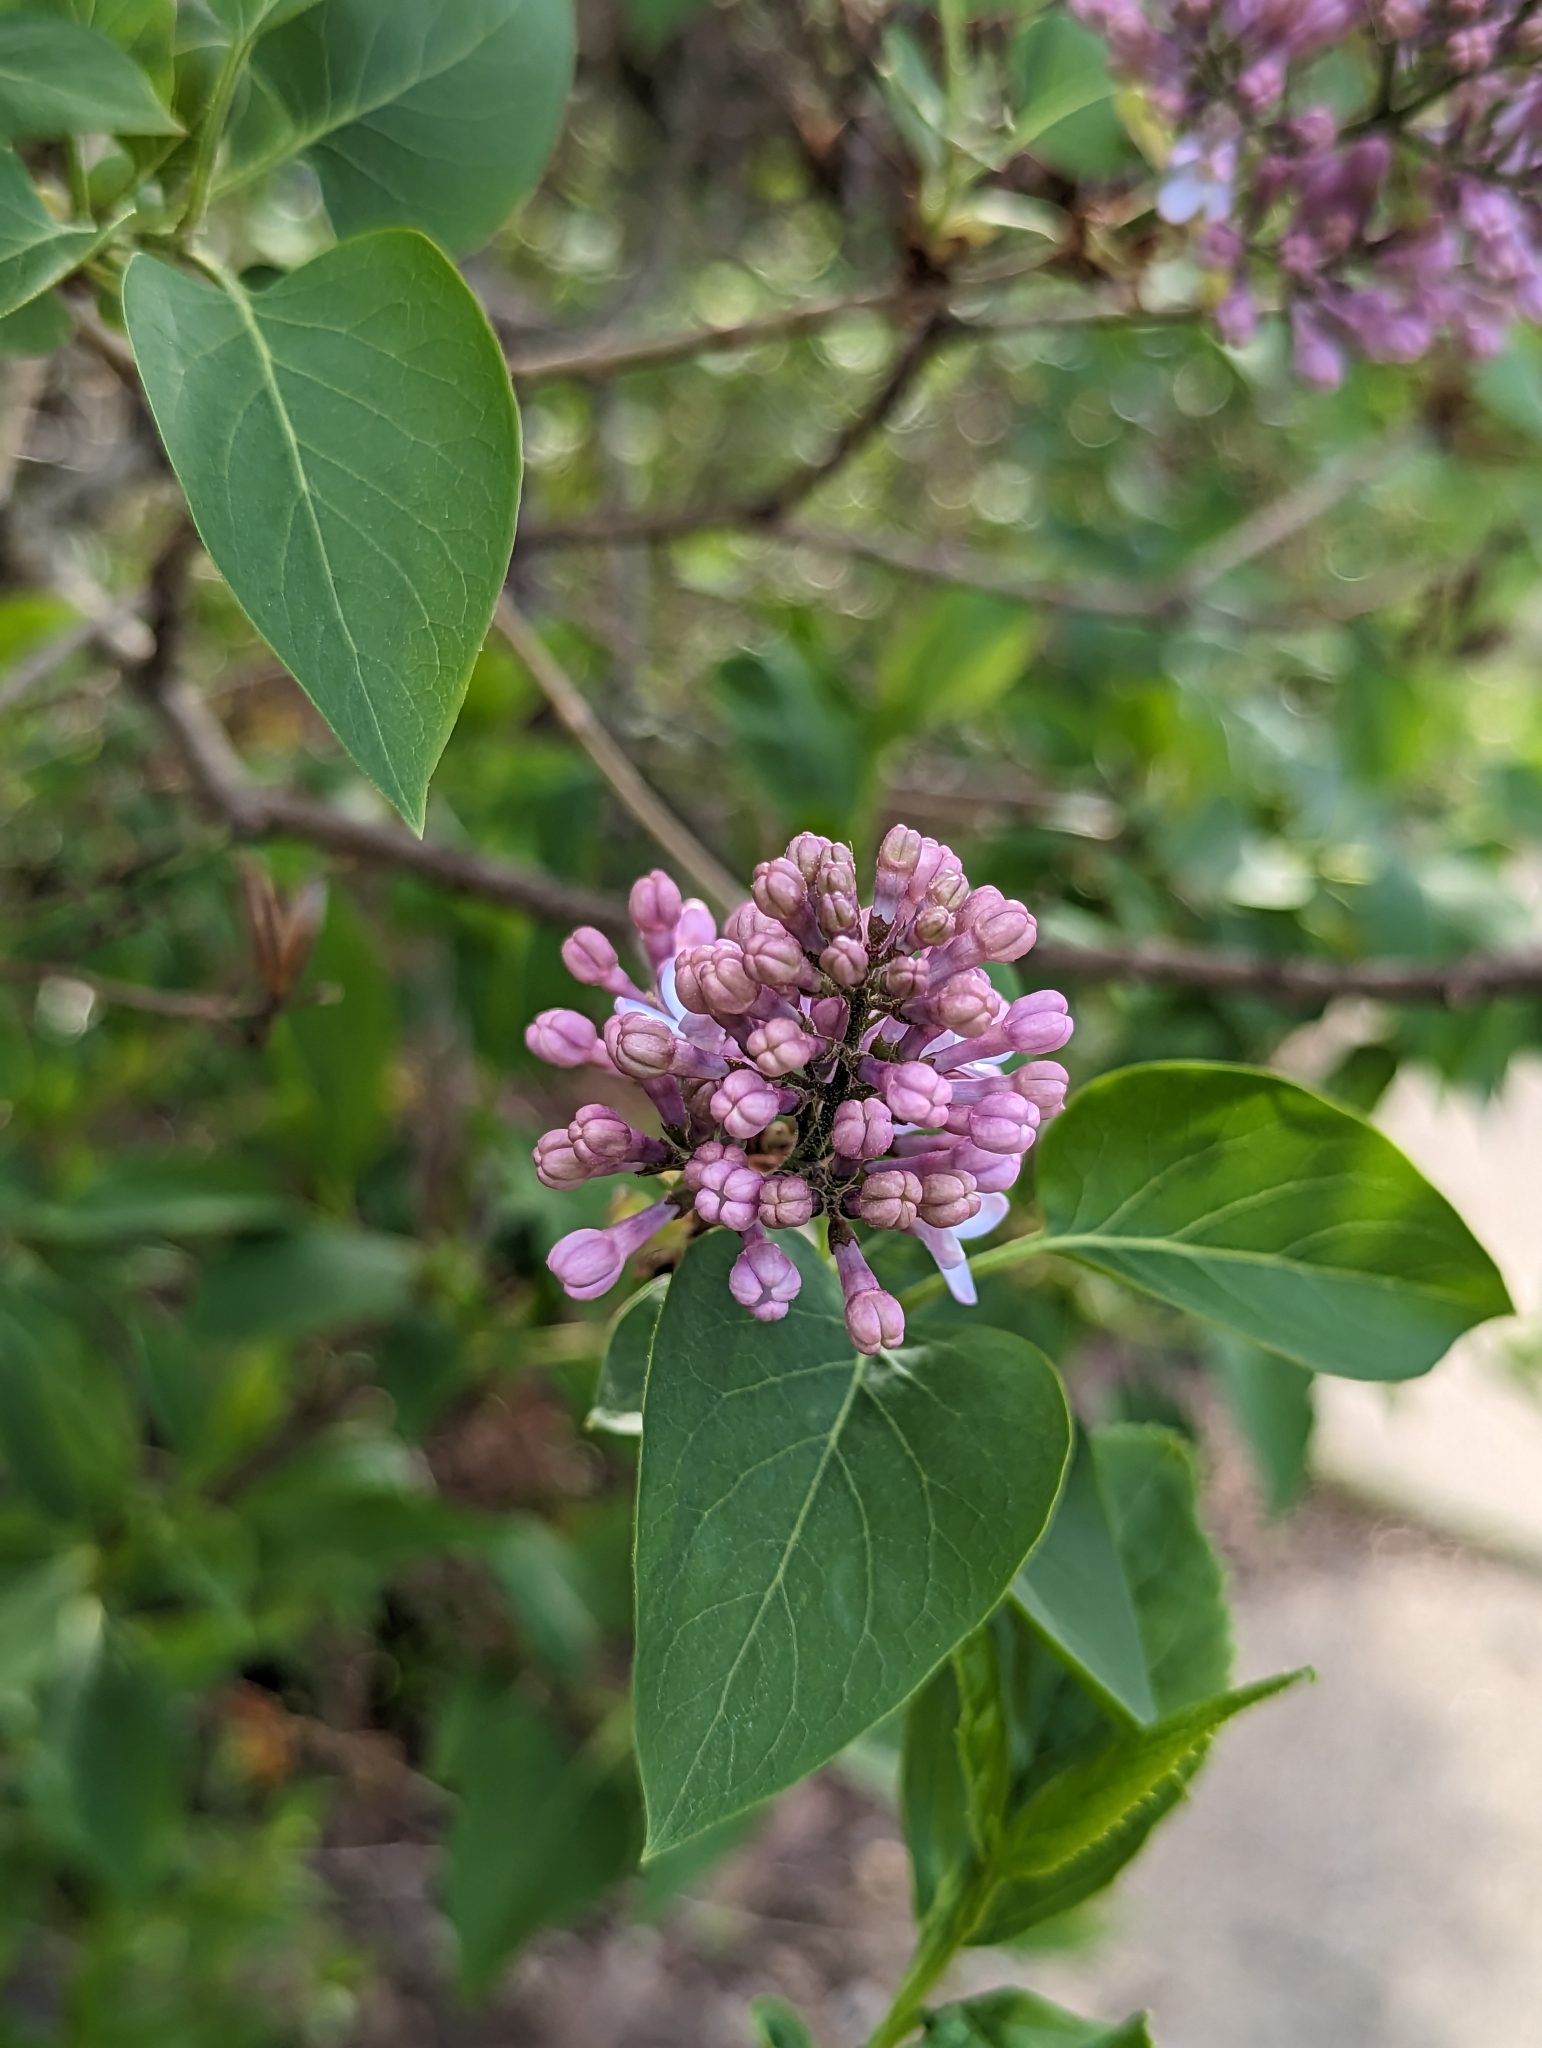 Lilac buds before they open